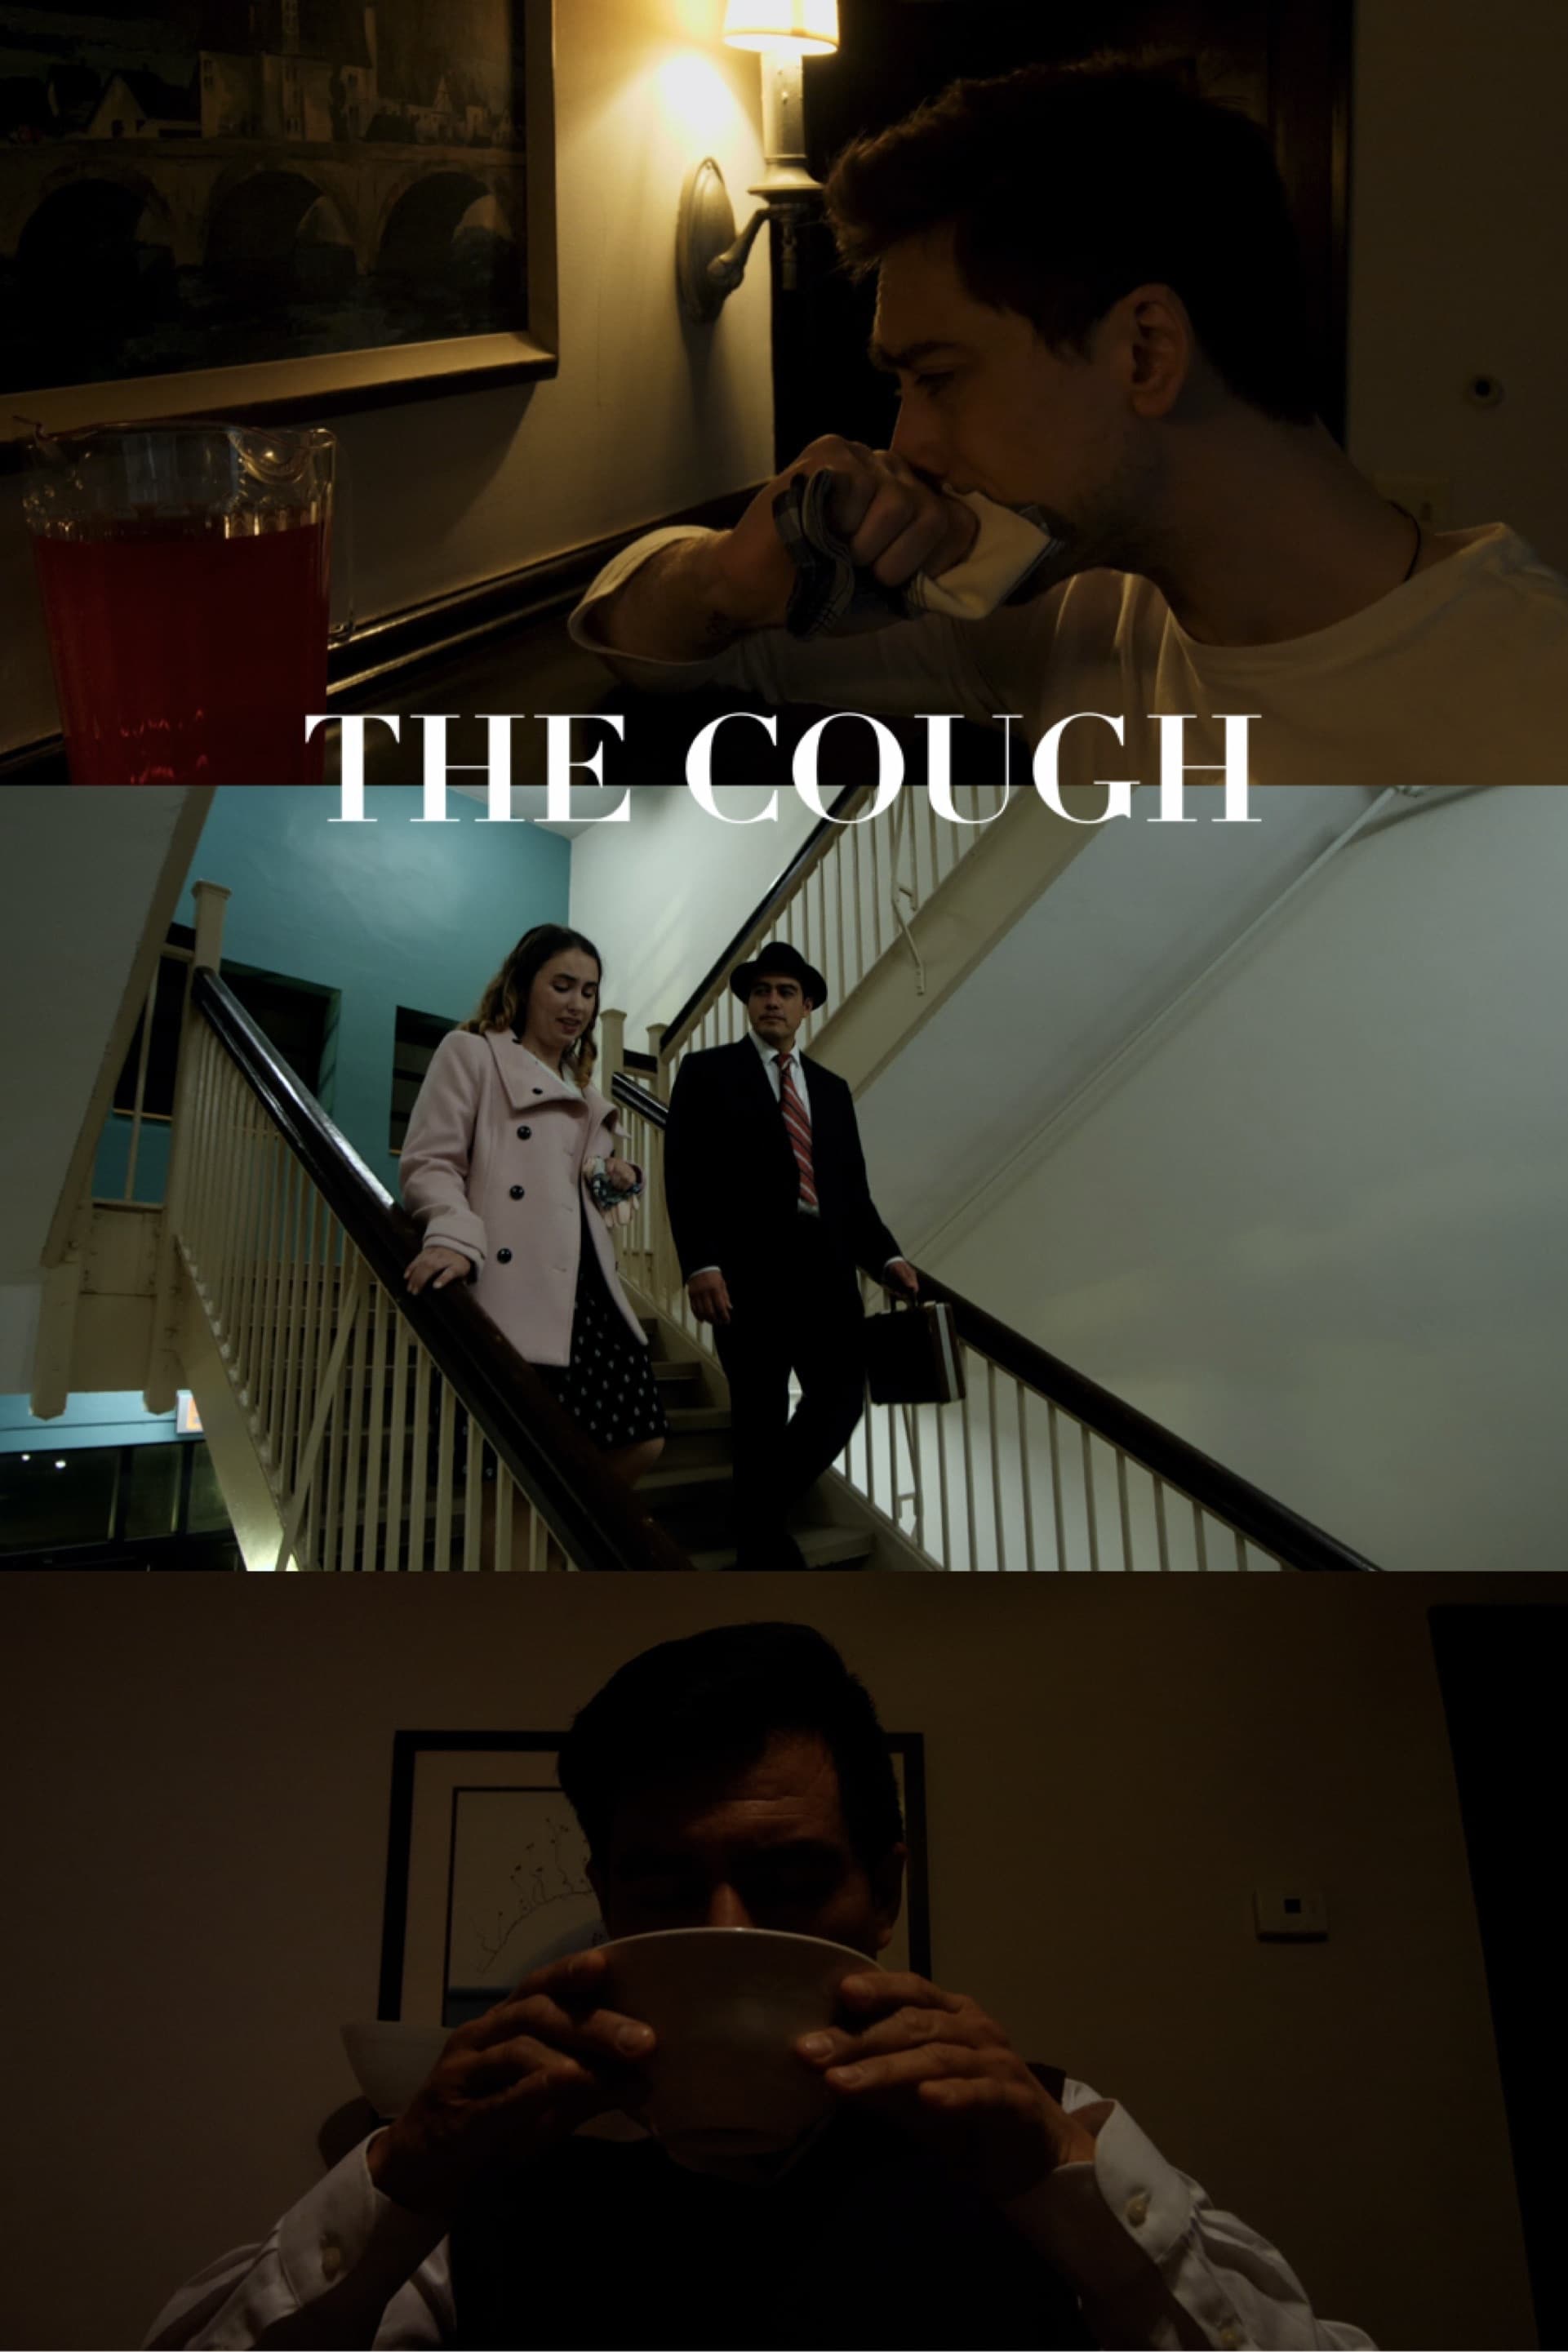 The Cough